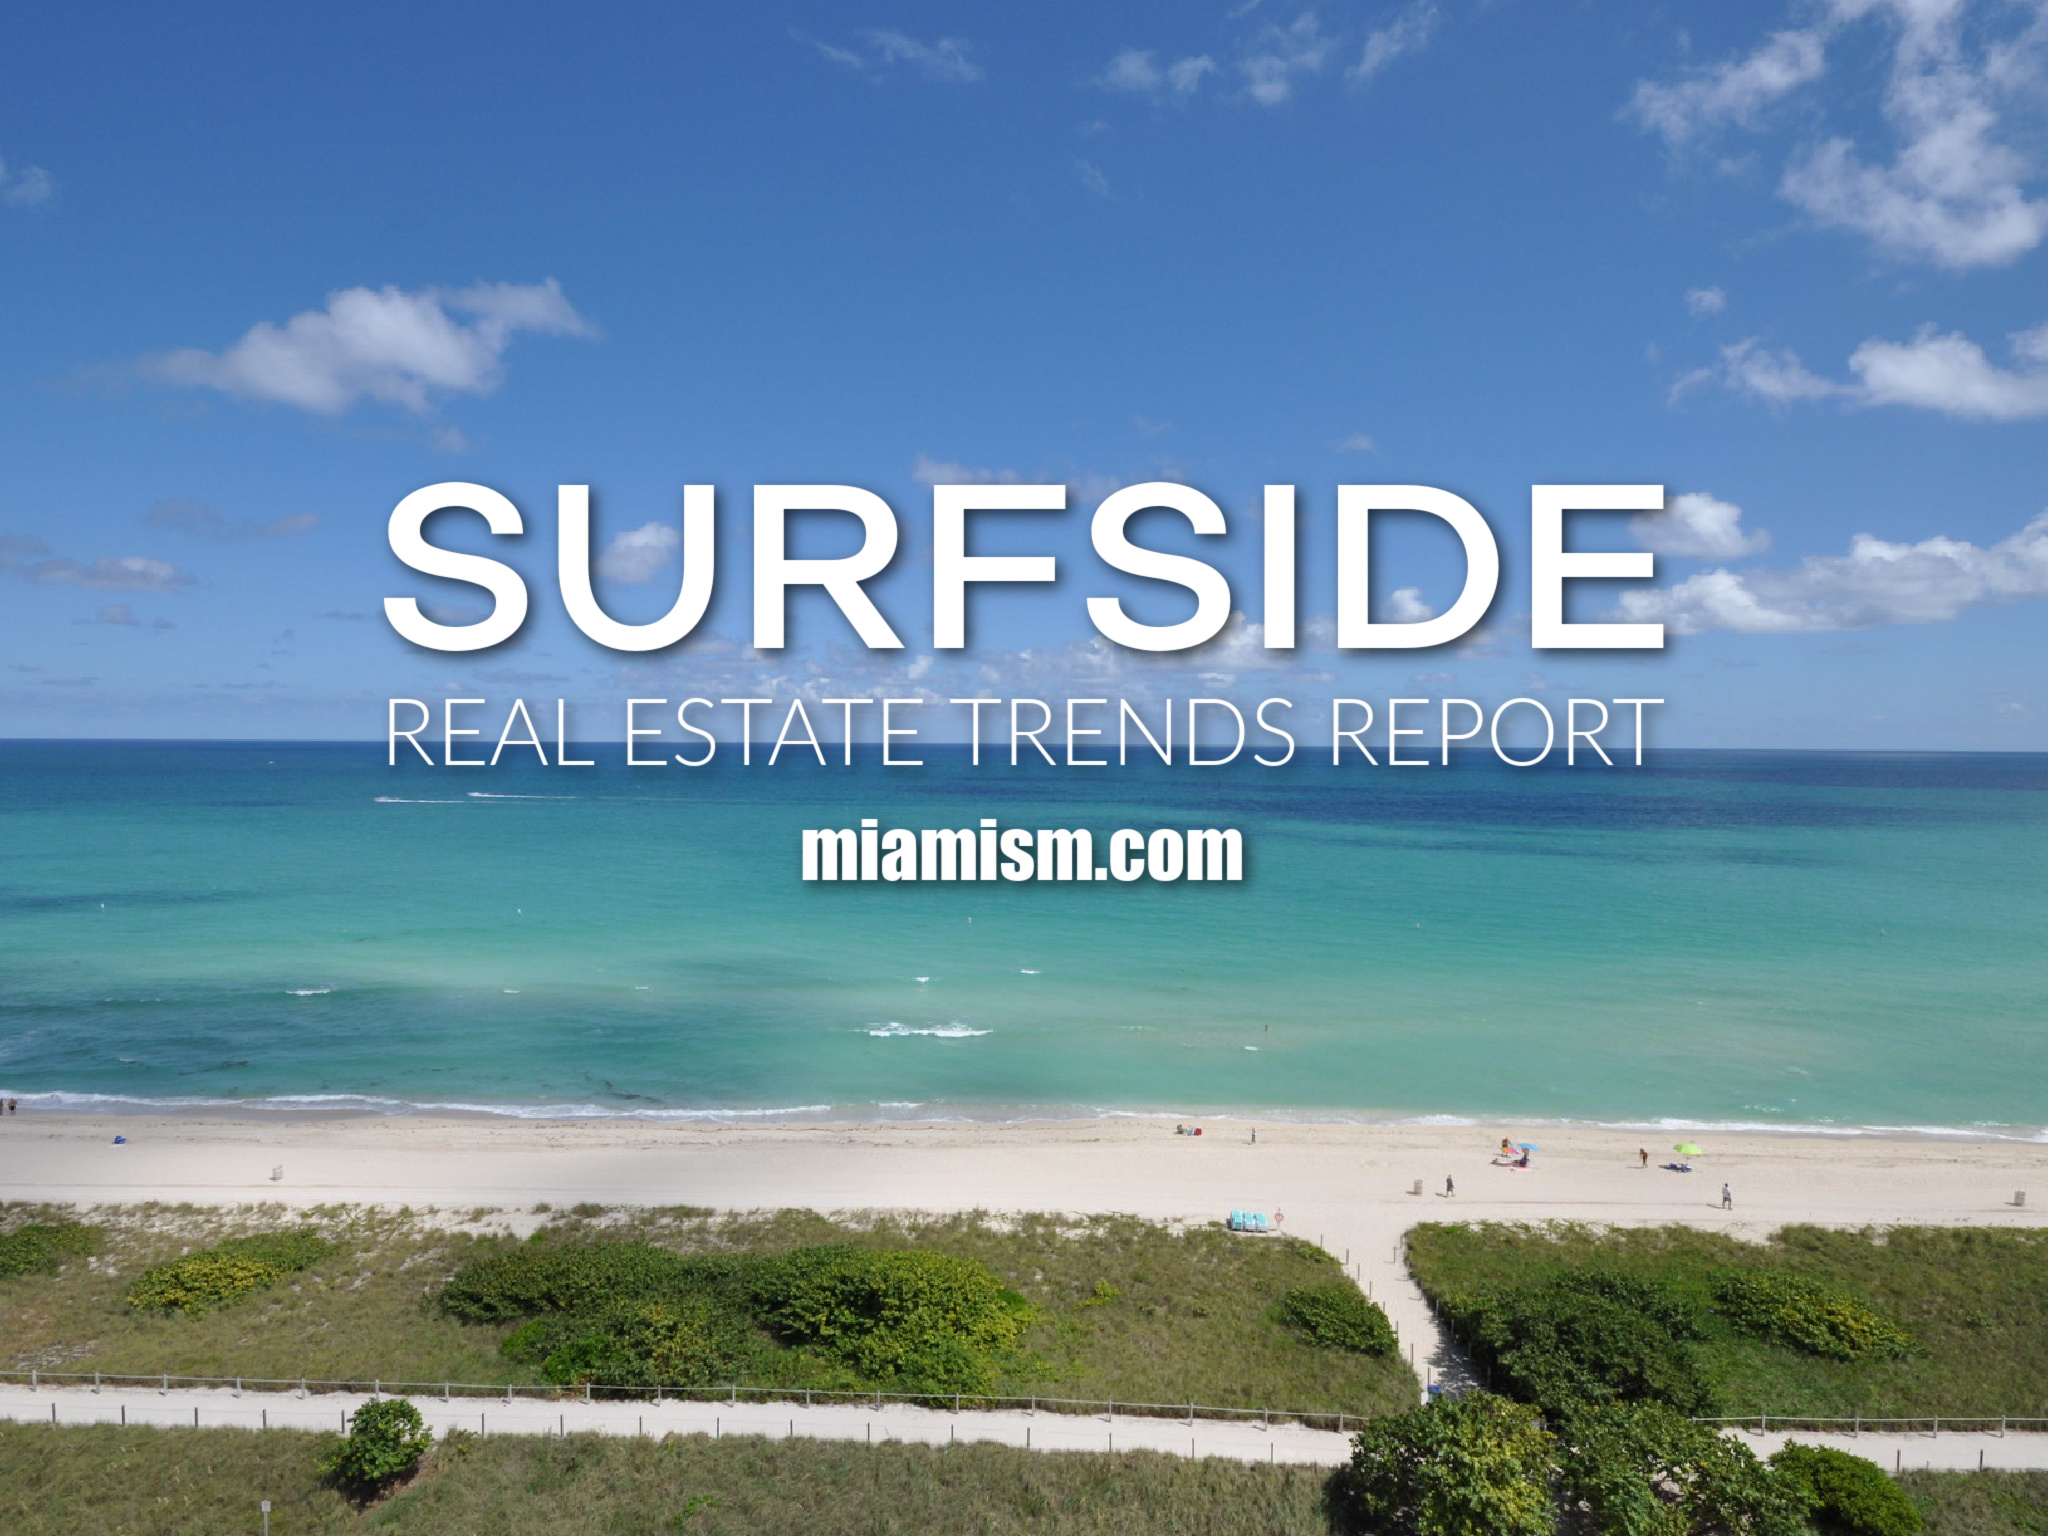 Surfside, Florida - Real Estate Trends Report by Miamism